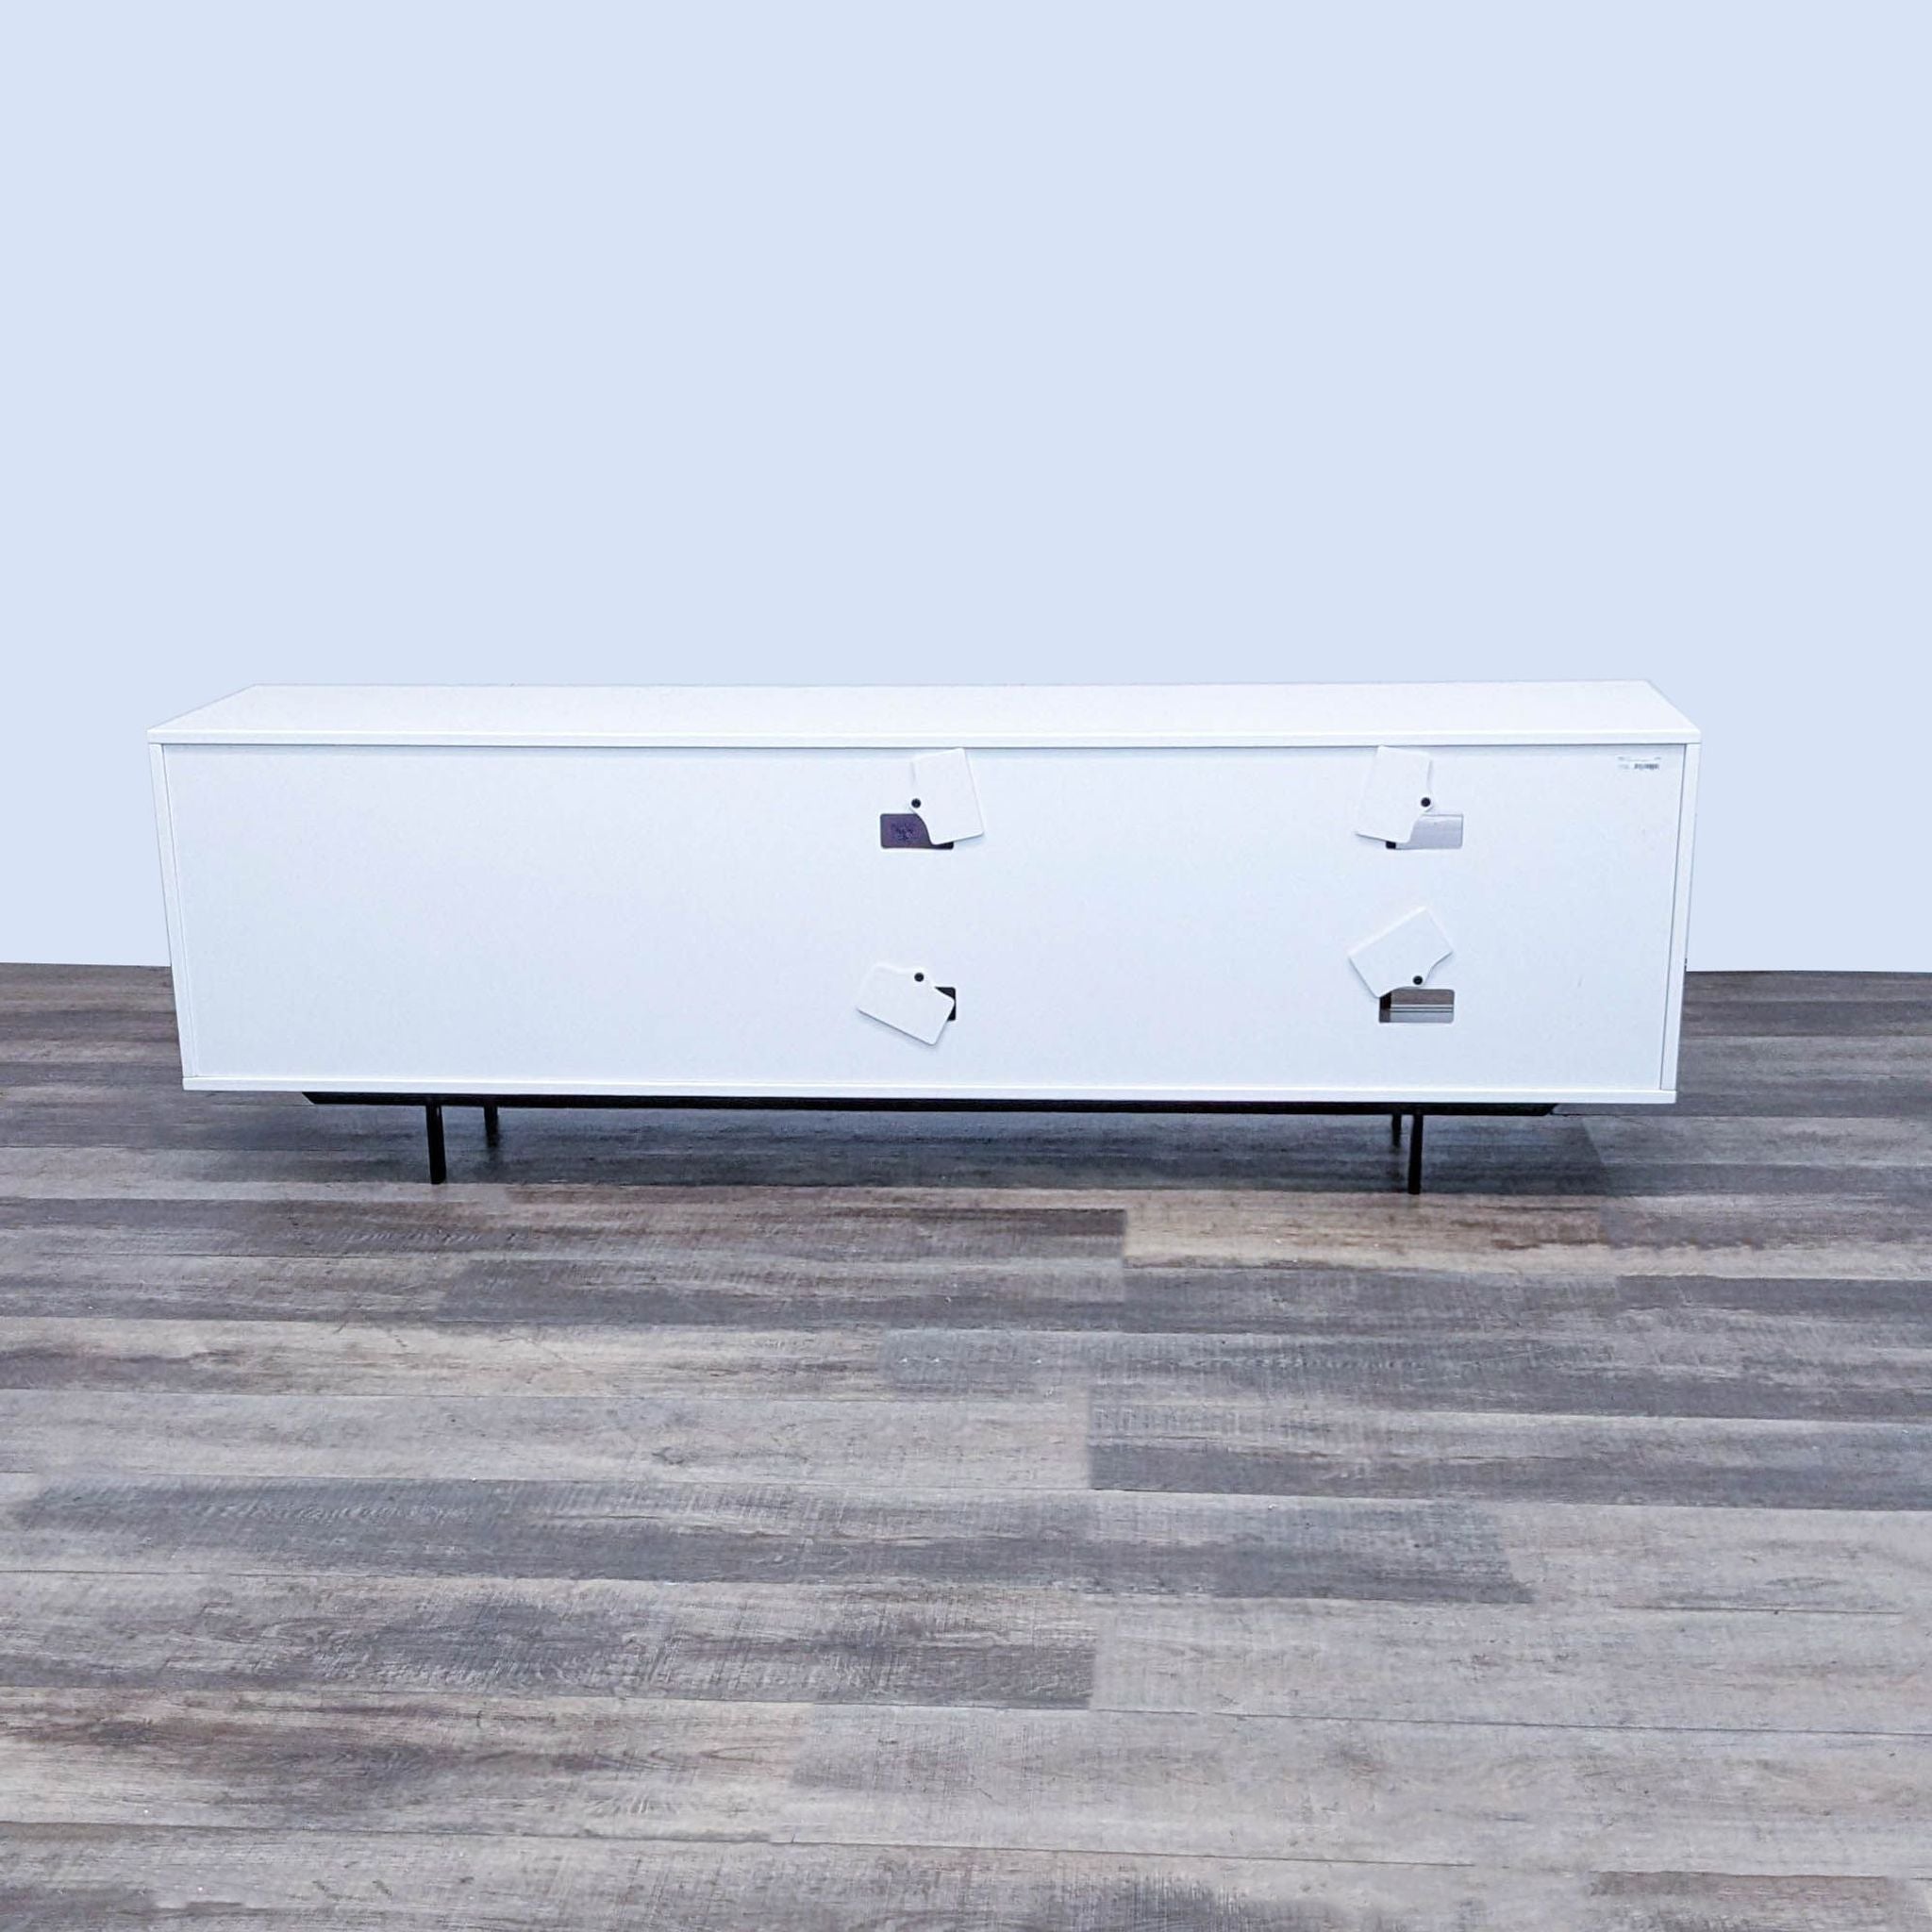 Alt text 2: Rear view of a white glossy Four Hands entertainment center with cable management cutouts and a product label visible on top.